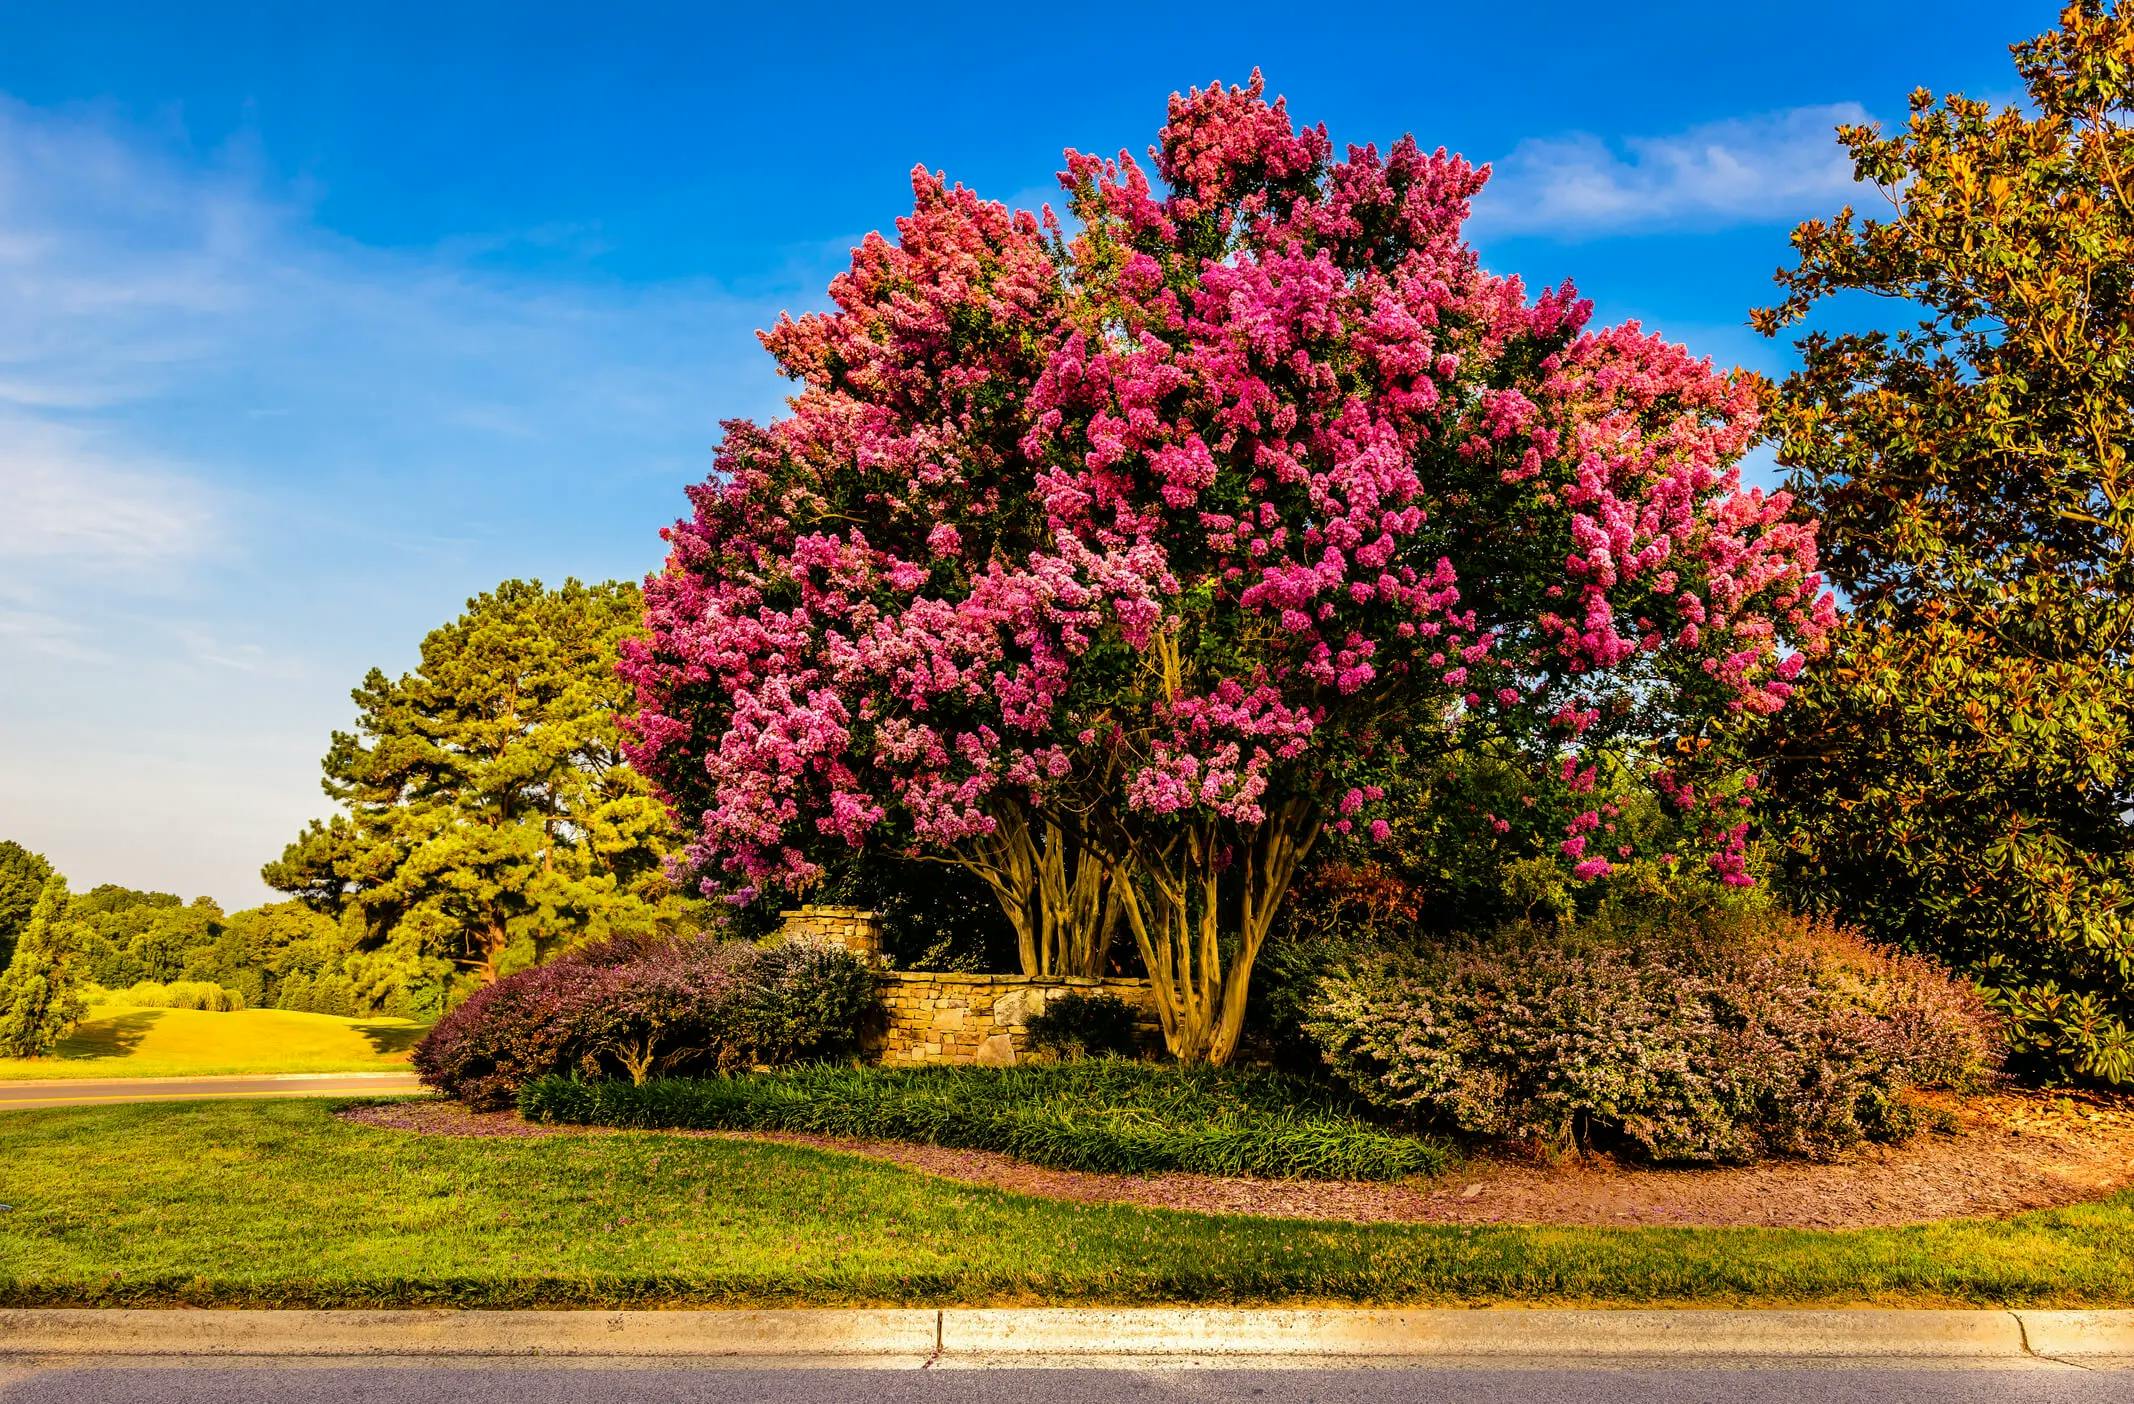 Beautiful Crape Myrtle Tree with bright pink blooms in a green landscape amongst other shrubs and trees surrounding the crape myrtle.